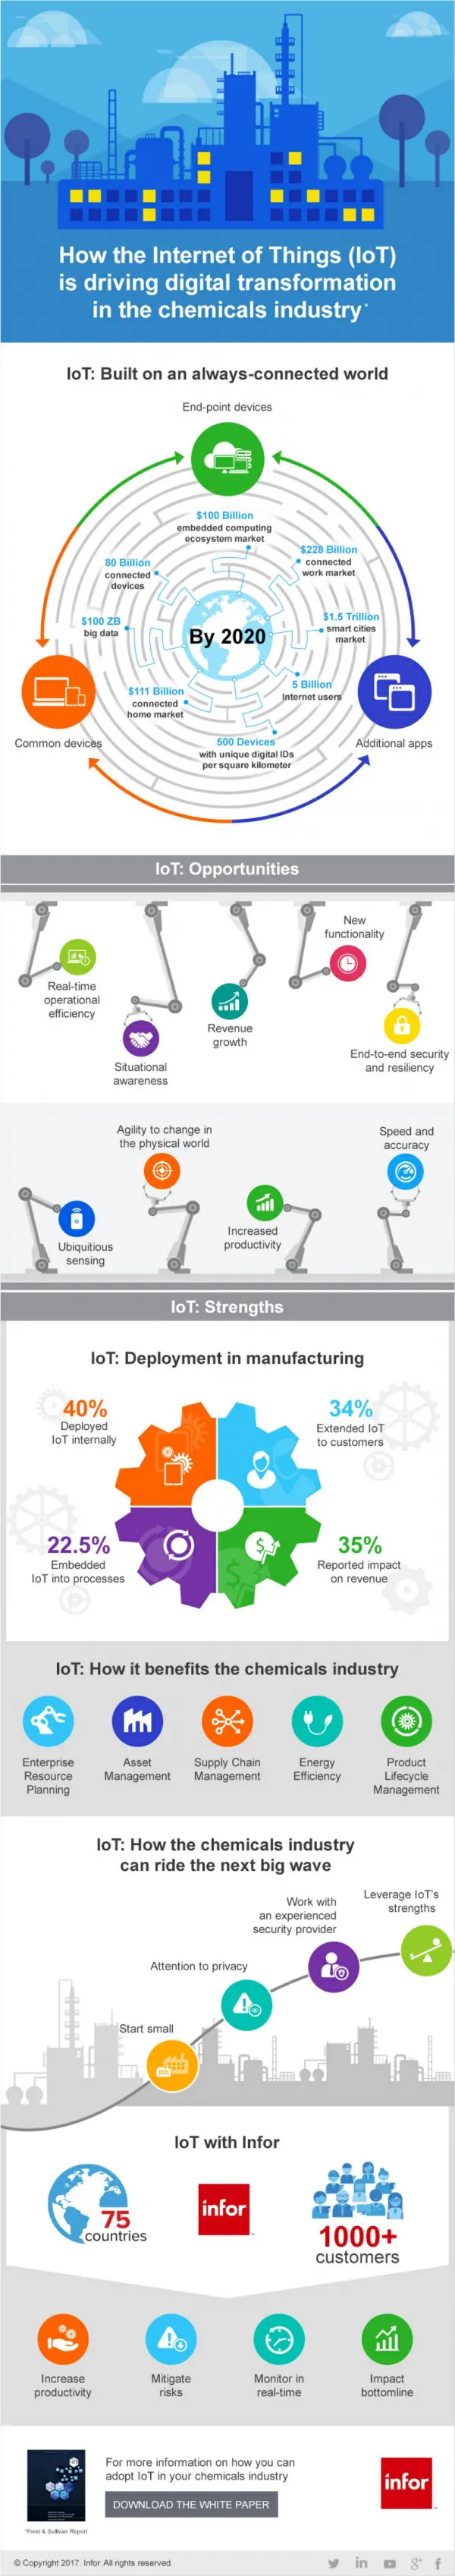 Infographic on How Digital Transformation is Driven by IoT in The Chemicals Industry